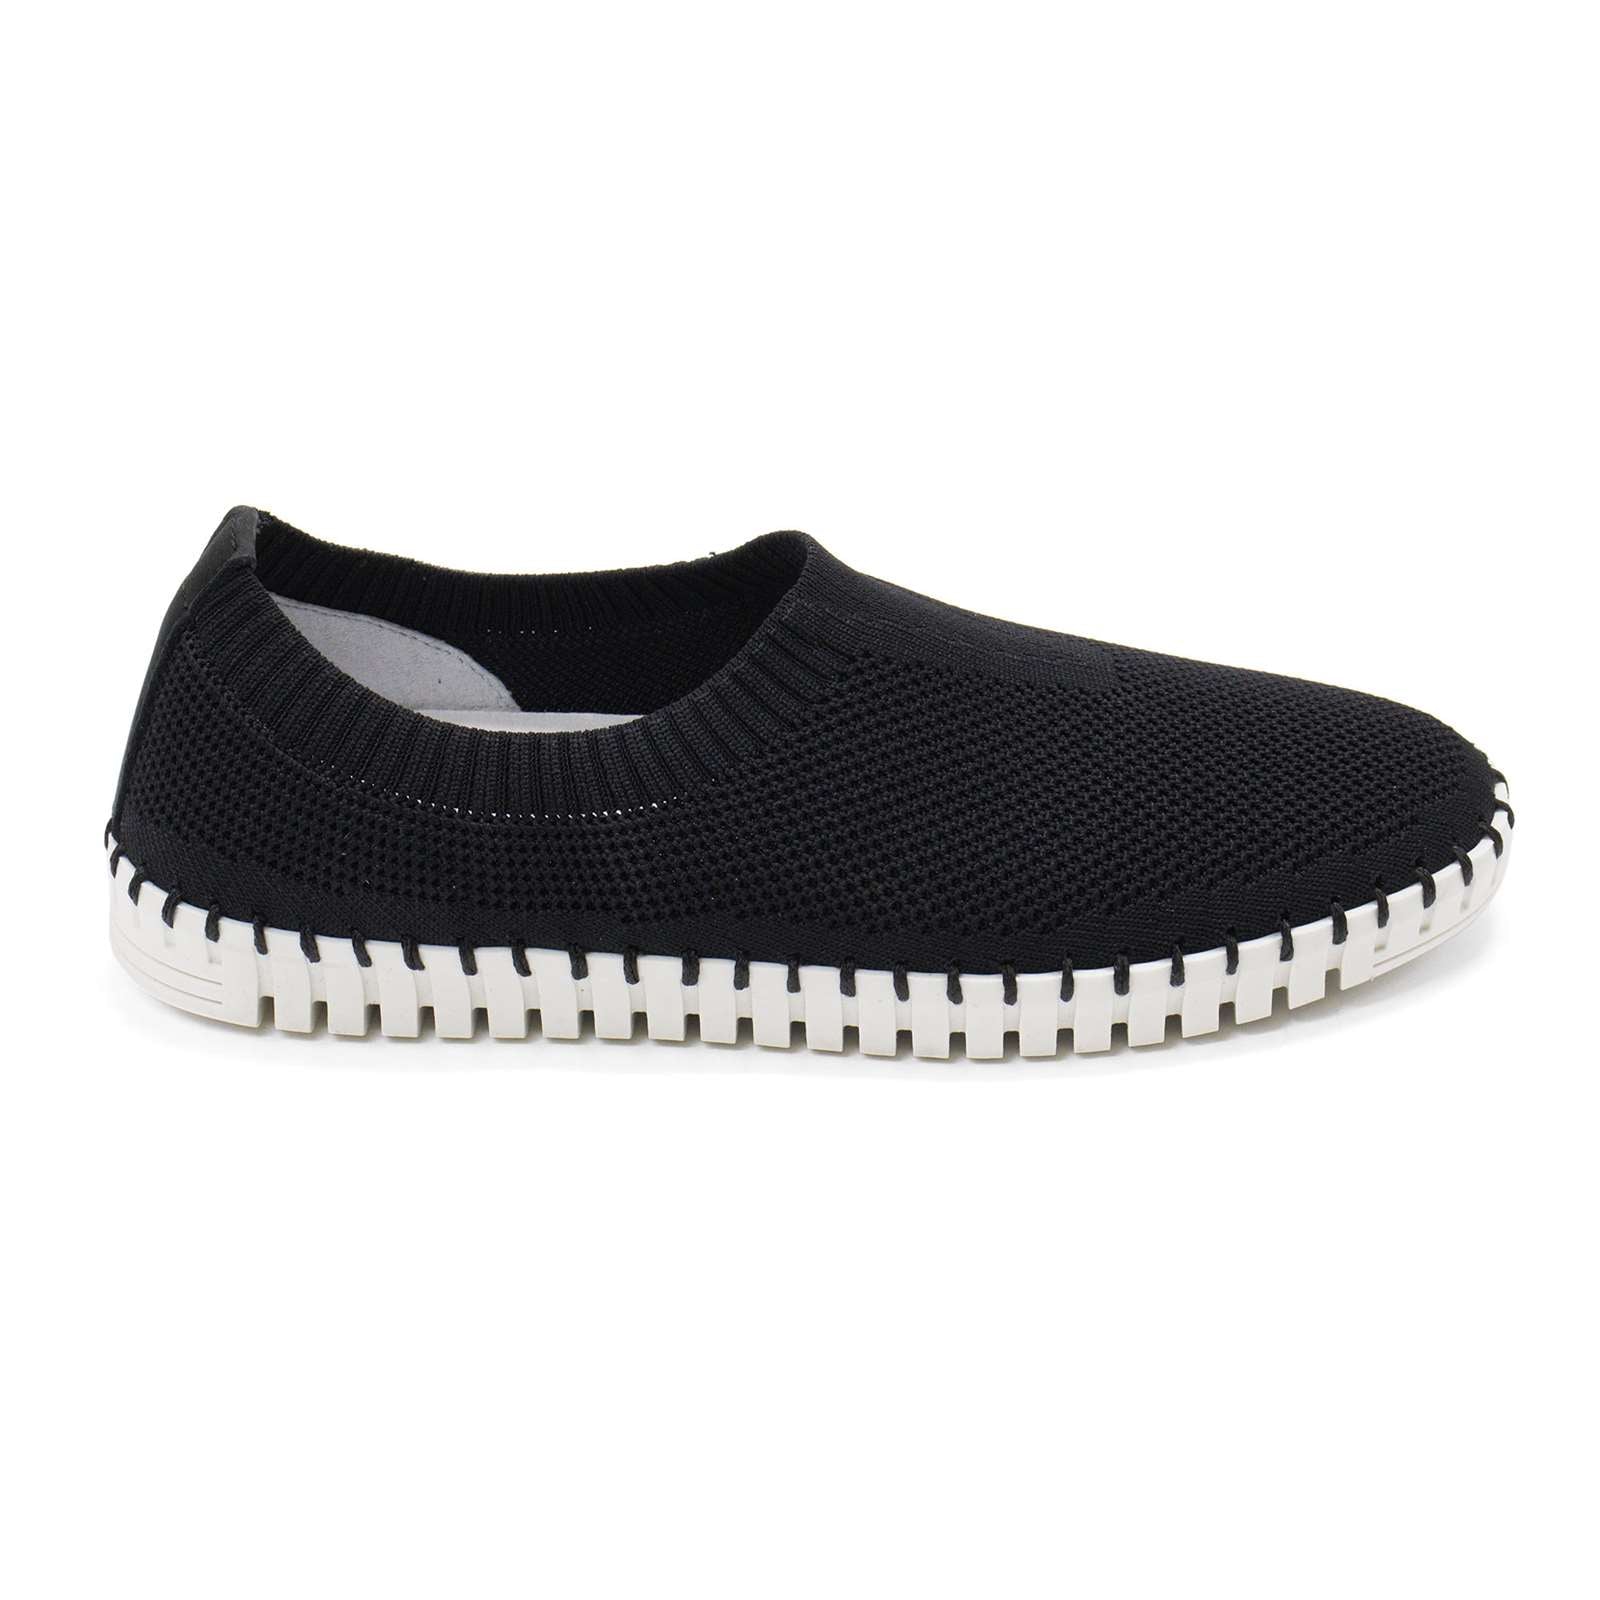 Eric Michael Women Lucy Slip-On Stretchable Flats